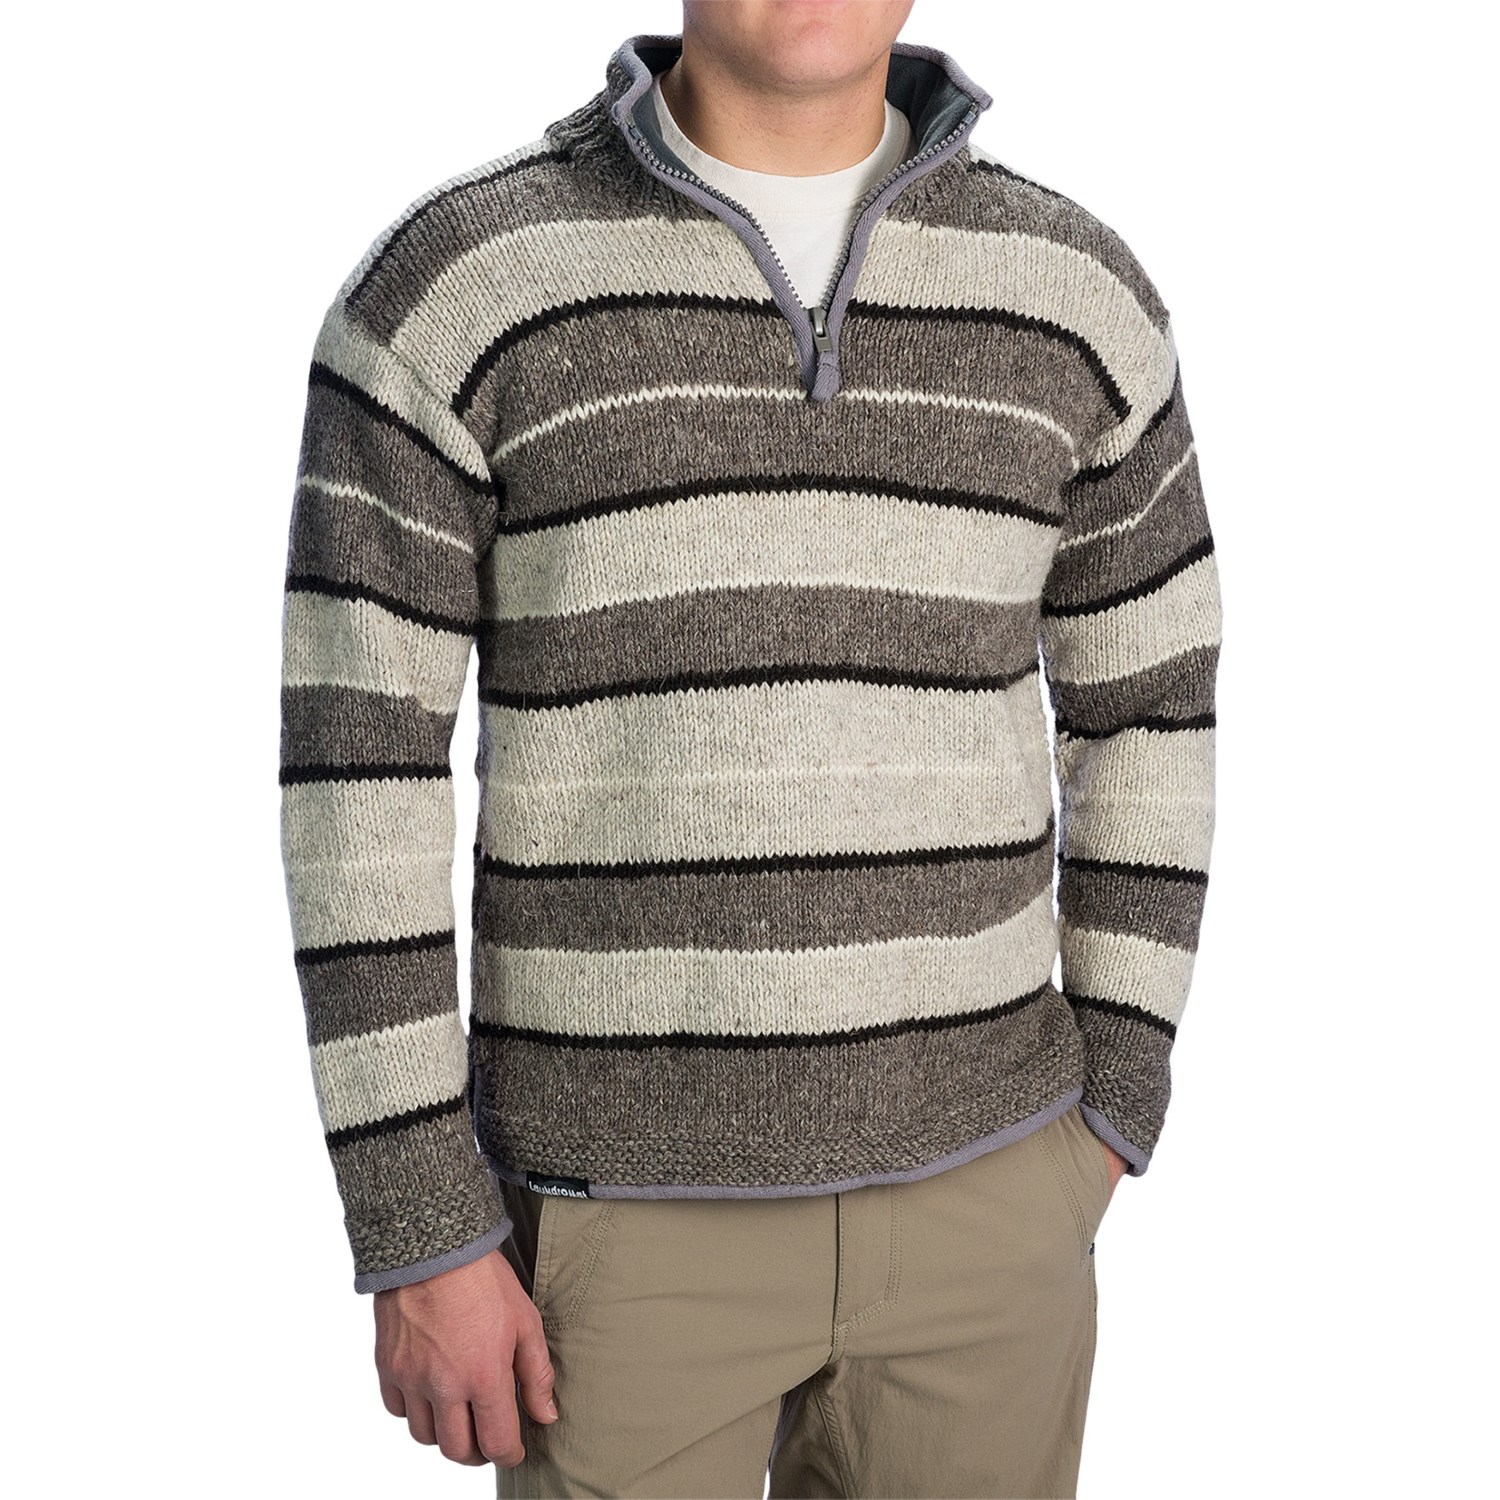 Laundromat Rugby Sweater (For Men) 8413U - Save 74%